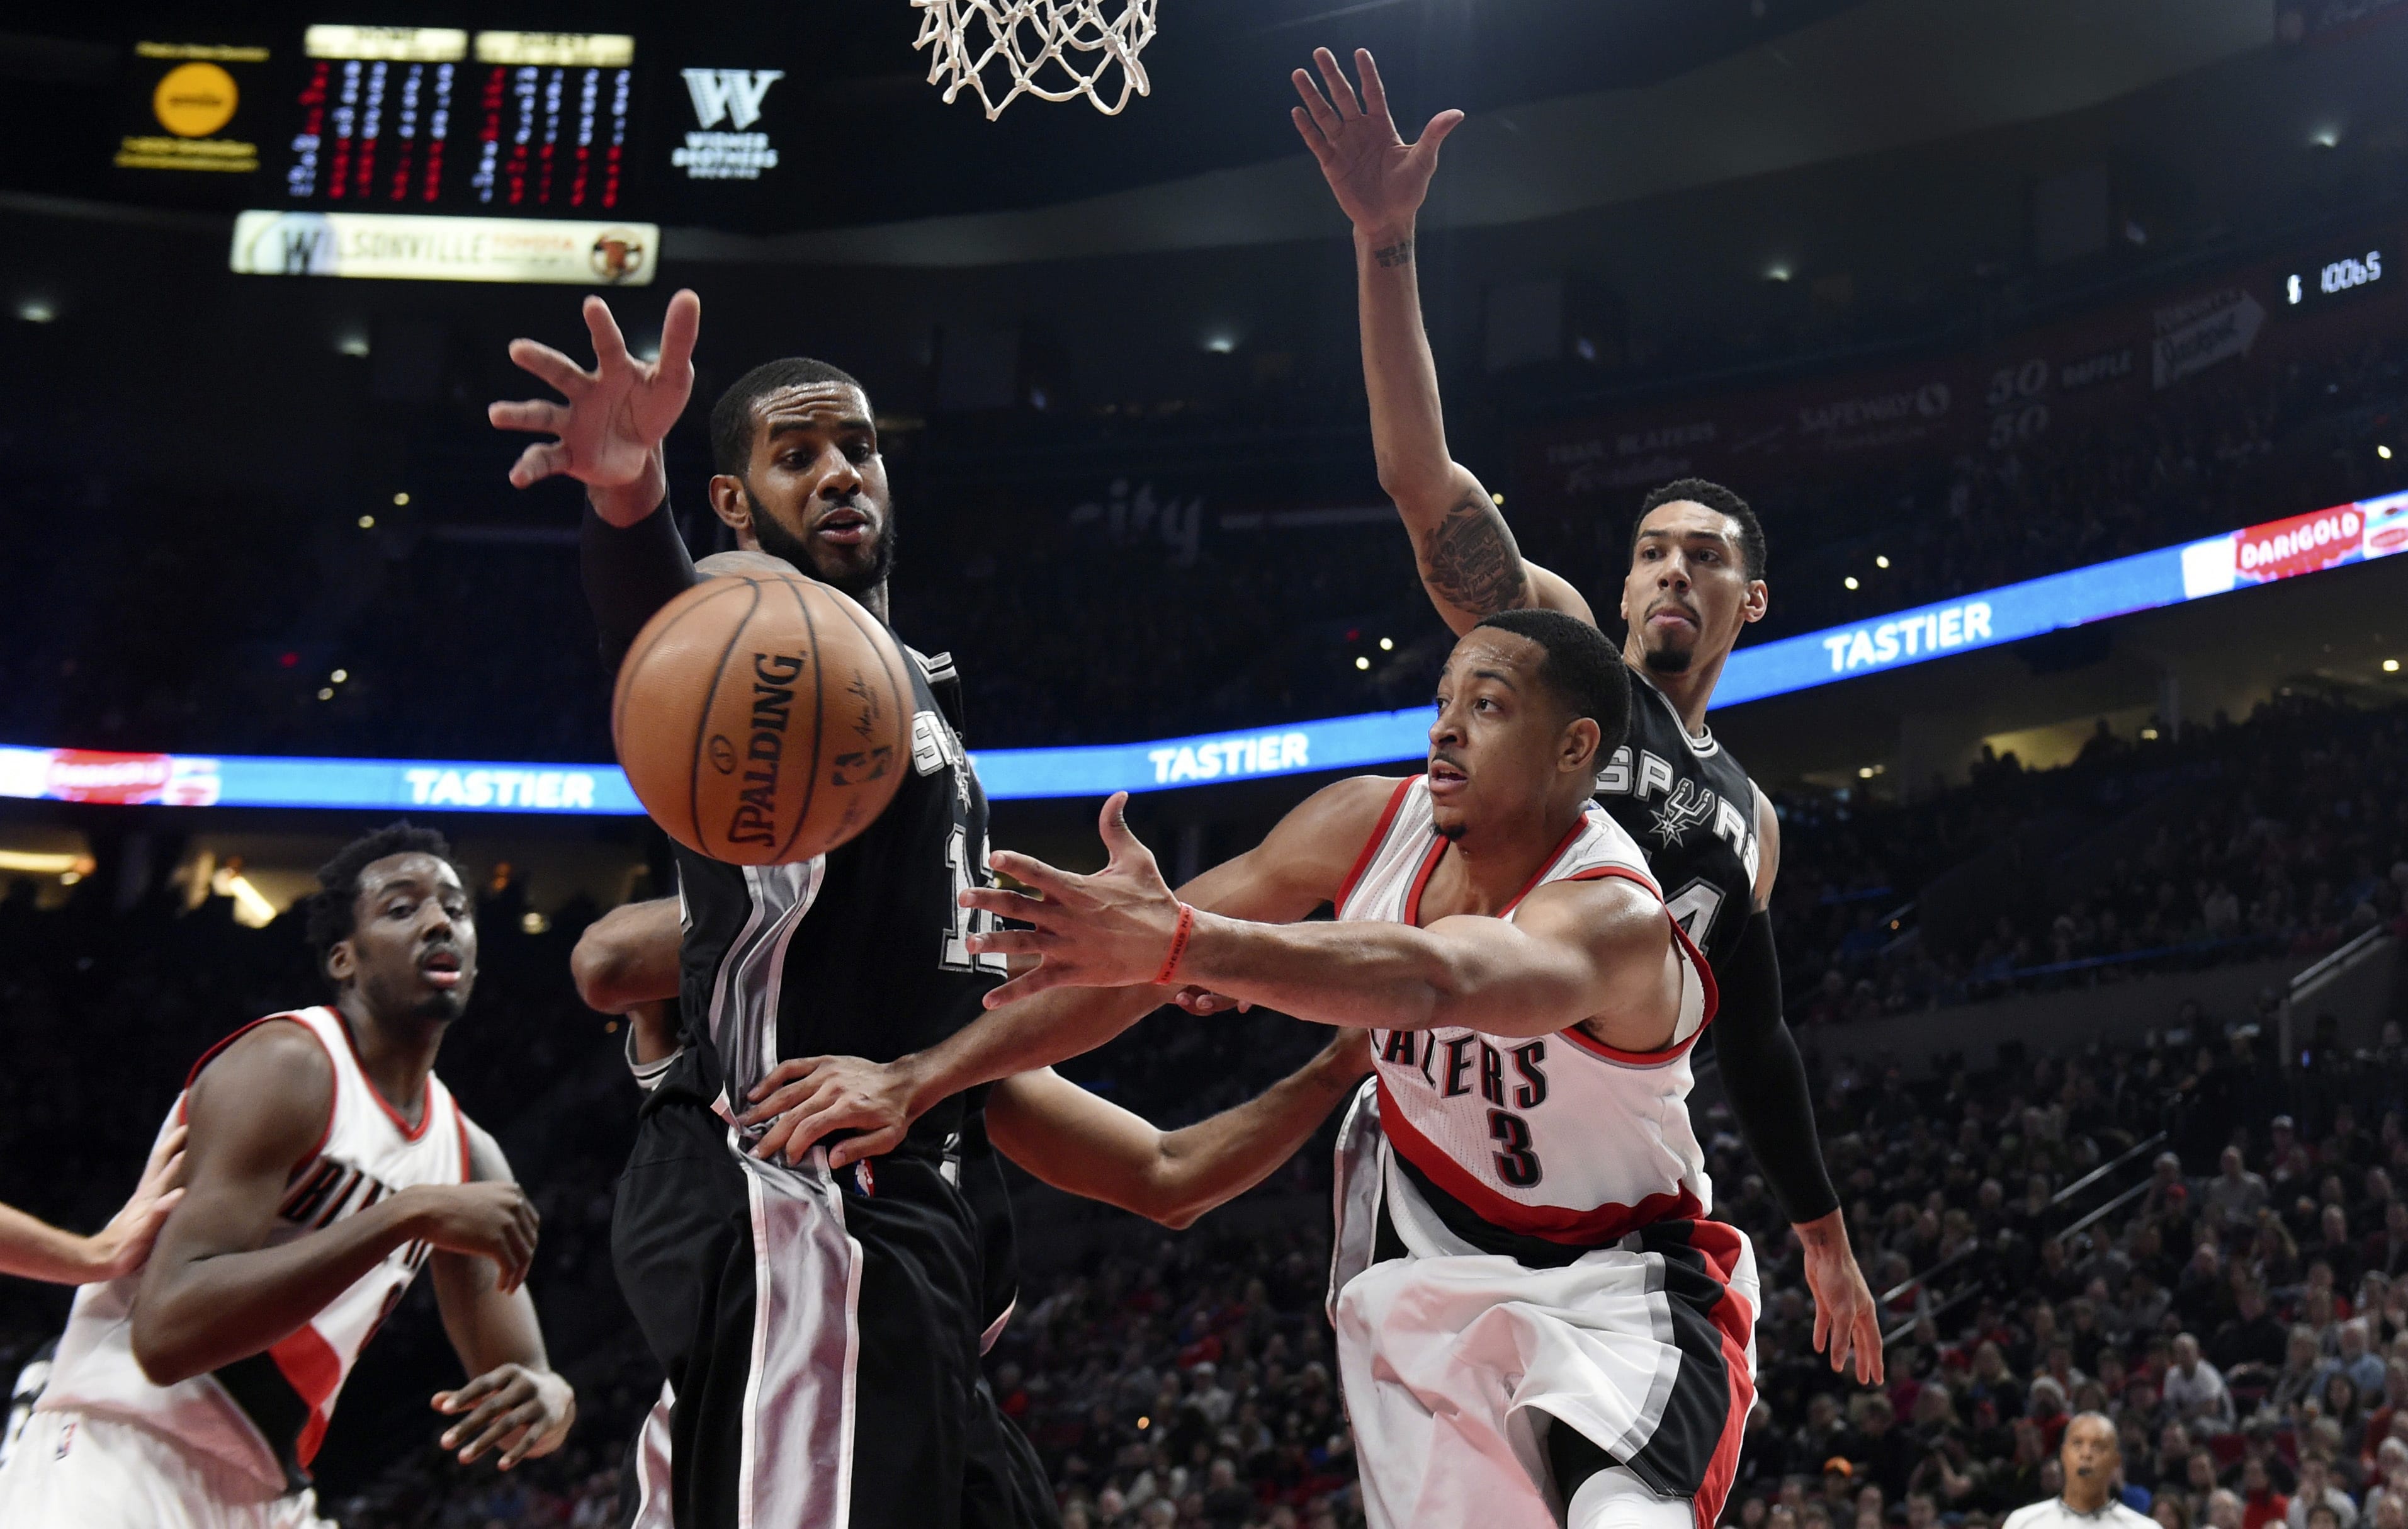 Portland Trail Blazers guard C.J. McCollum passes the ball as San Antonio Spurs forward LaMarcus Aldridge and guard Danny Green defend during the second half of an NBA basketball game in Portland, Ore., Friday, Dec. 23, 2016. The Spurs won 110-90.